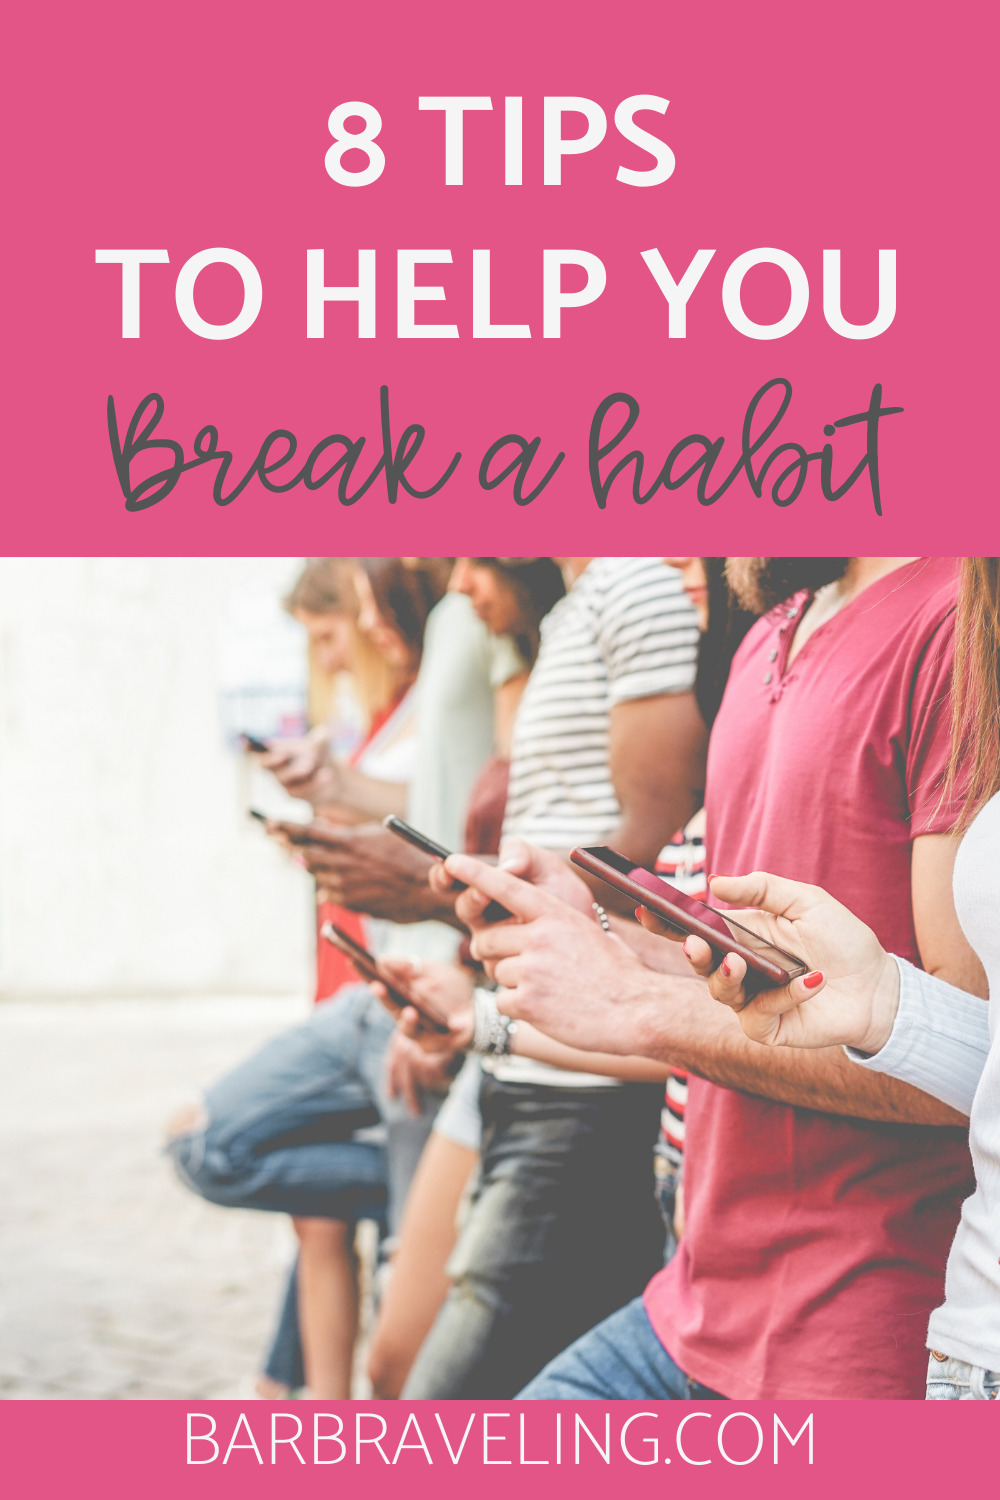 Breaking a Habit Tips for Success